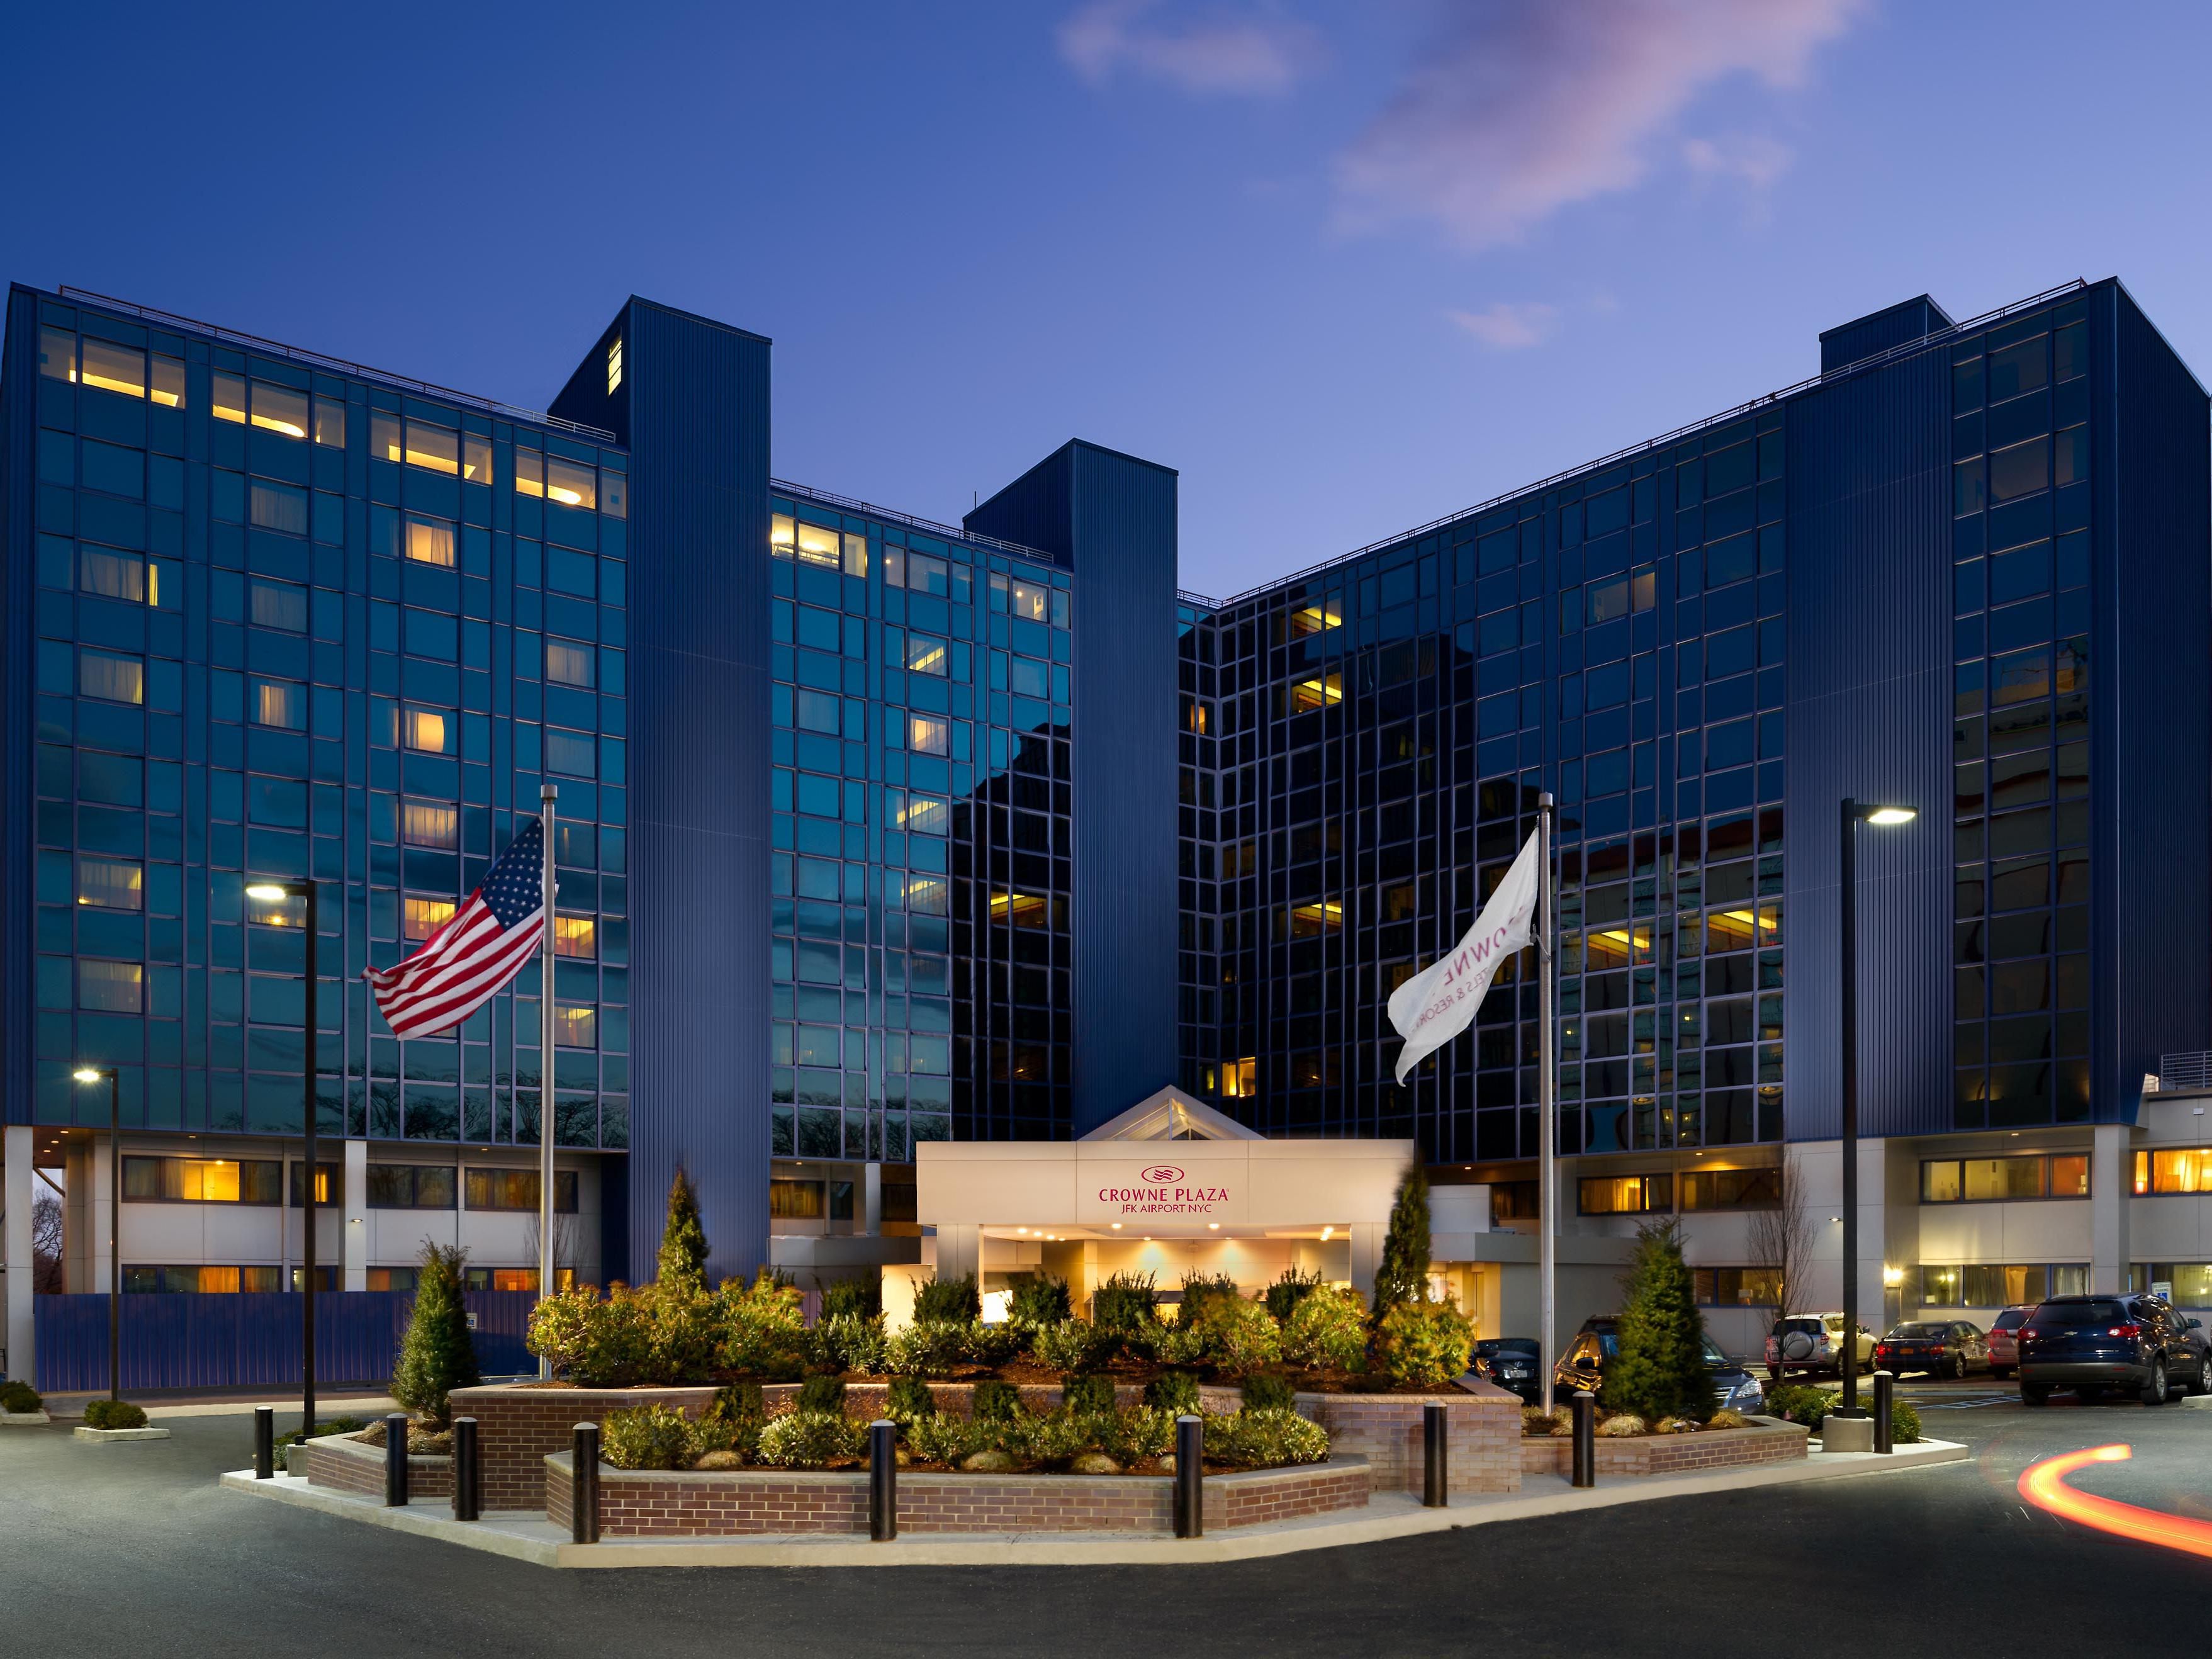 Located near the John F. Kennedy International Airport, our hotel is a quarter-mile from one of the world's busiest airports. We offer guests complimentary parking, as well as a free 24-hour shuttle service. The service is available every day, running in 30-minute intervals at our pickup or drop-off locations.
